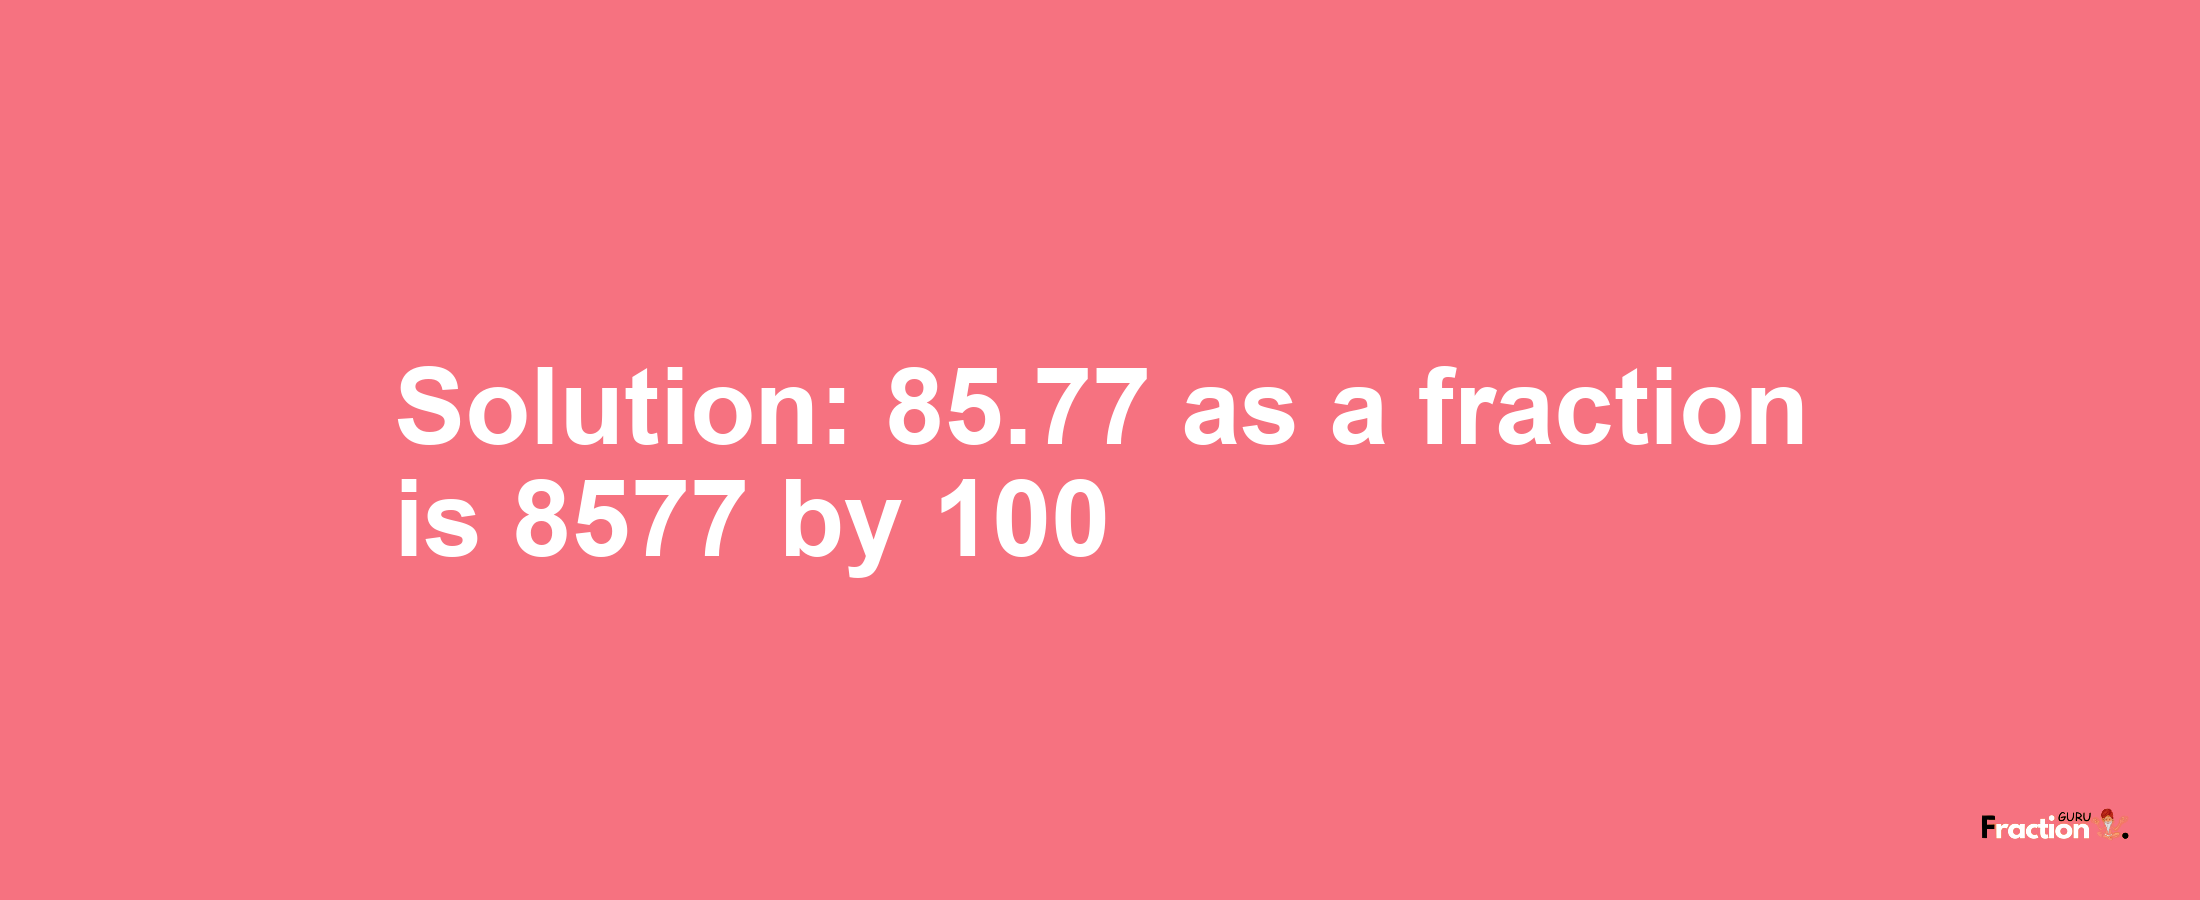 Solution:85.77 as a fraction is 8577/100